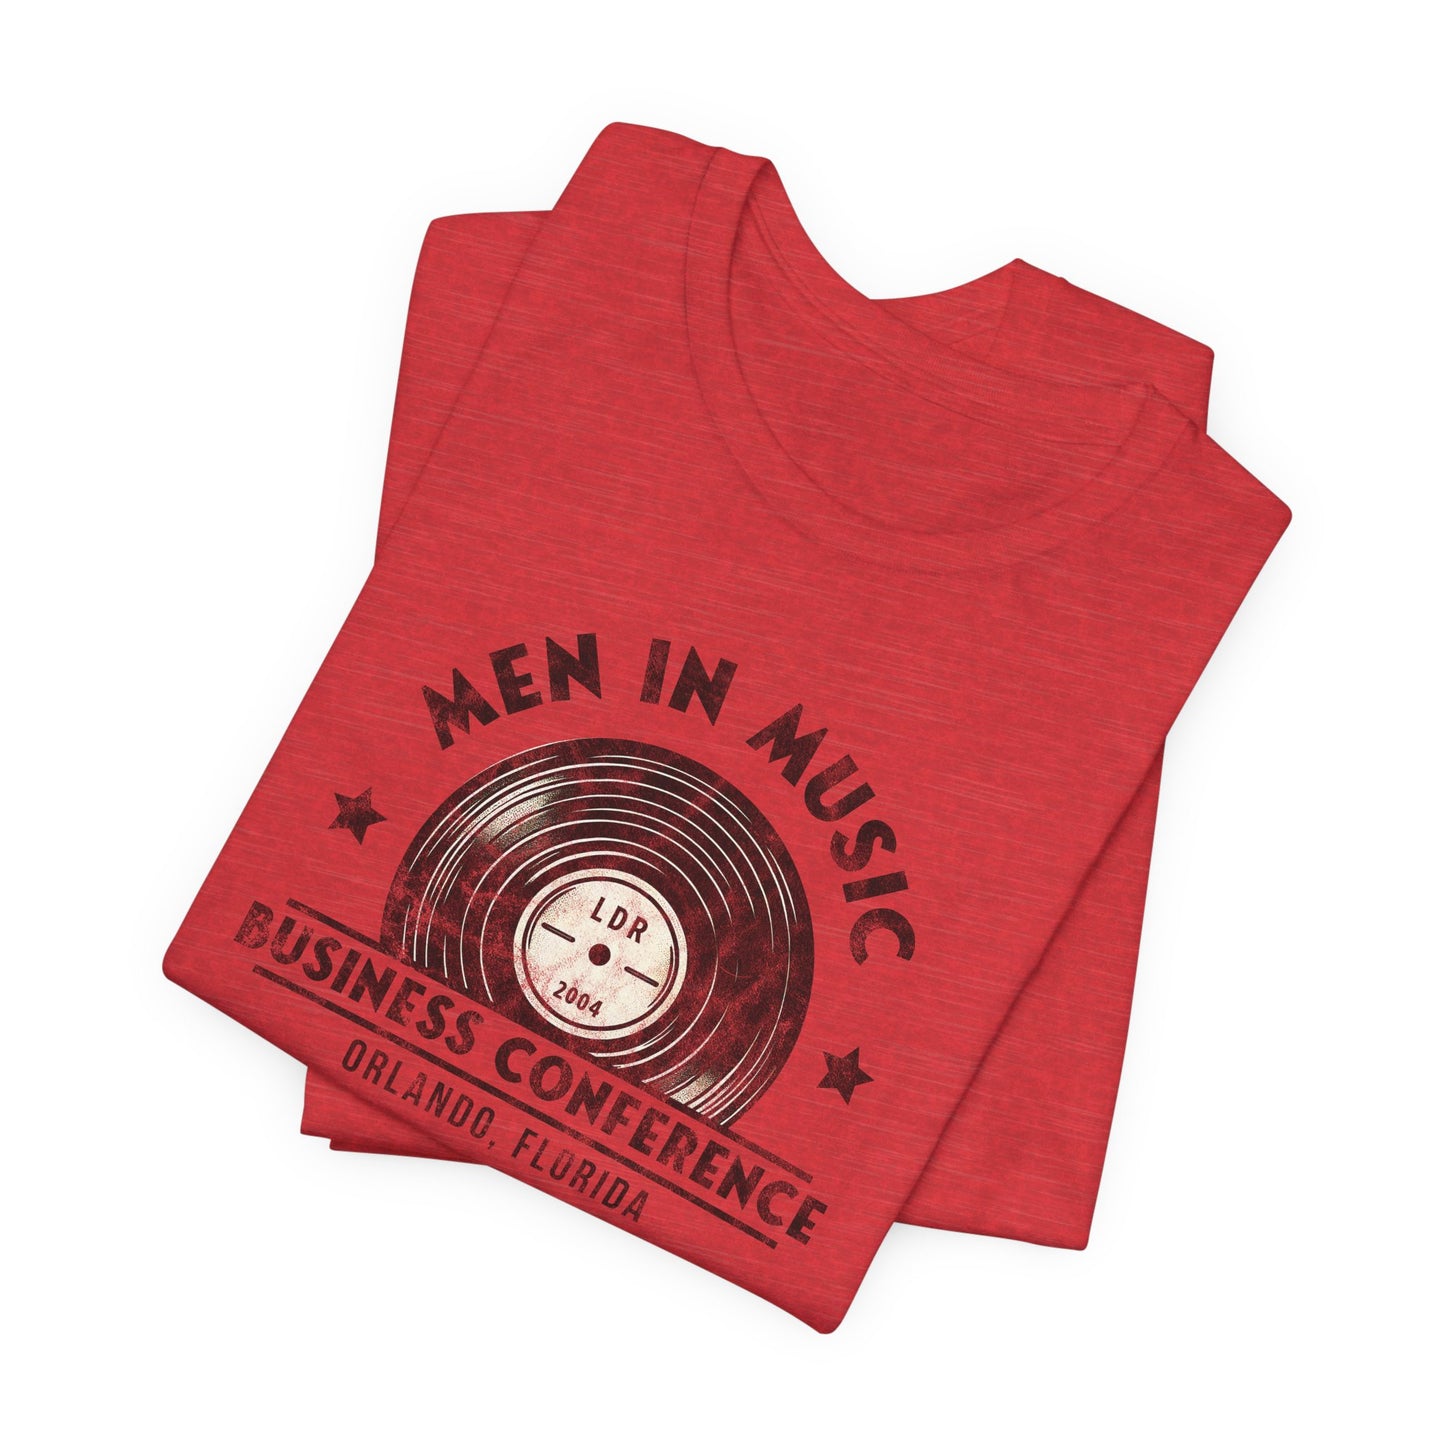 Men in Music Business Conference Distressed Unisex Jersey Short Sleeve Tee